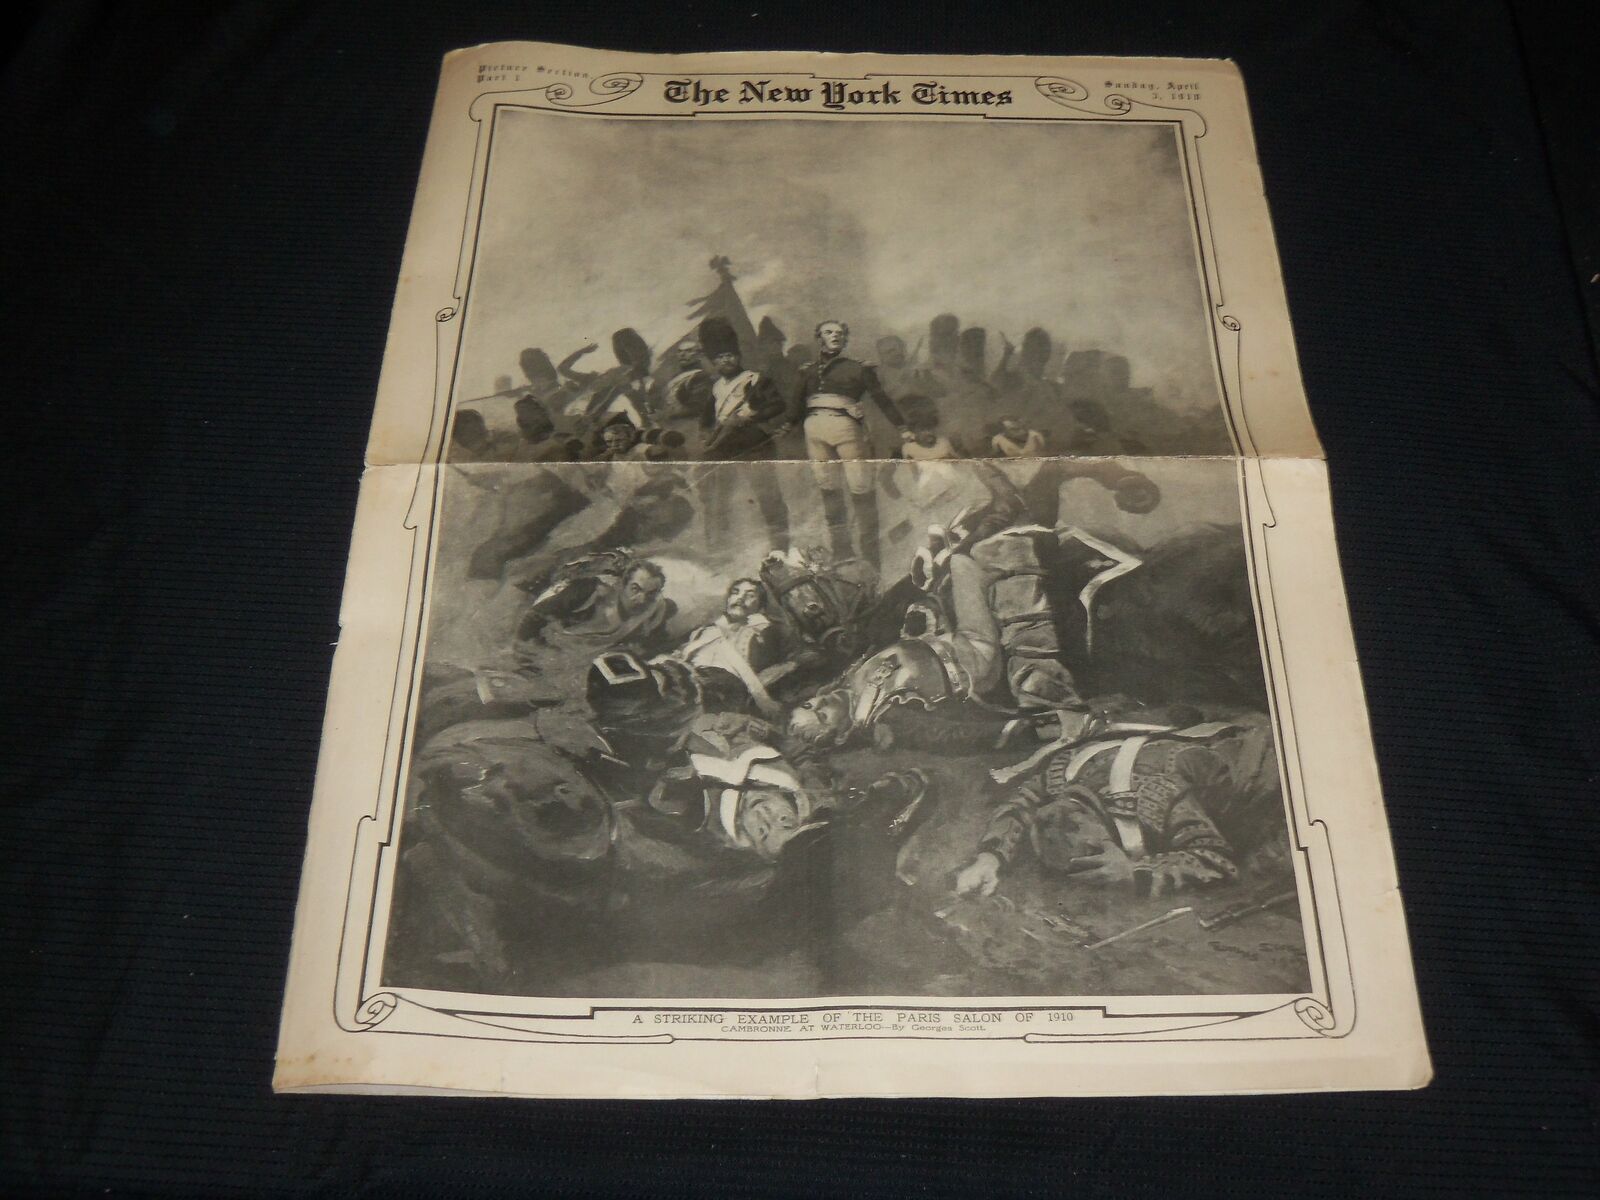 1910 APRIL 3 NEW YORK TIMES PICTURE SECTION - CAMBRONNE AT WATERLOO - NP 5642